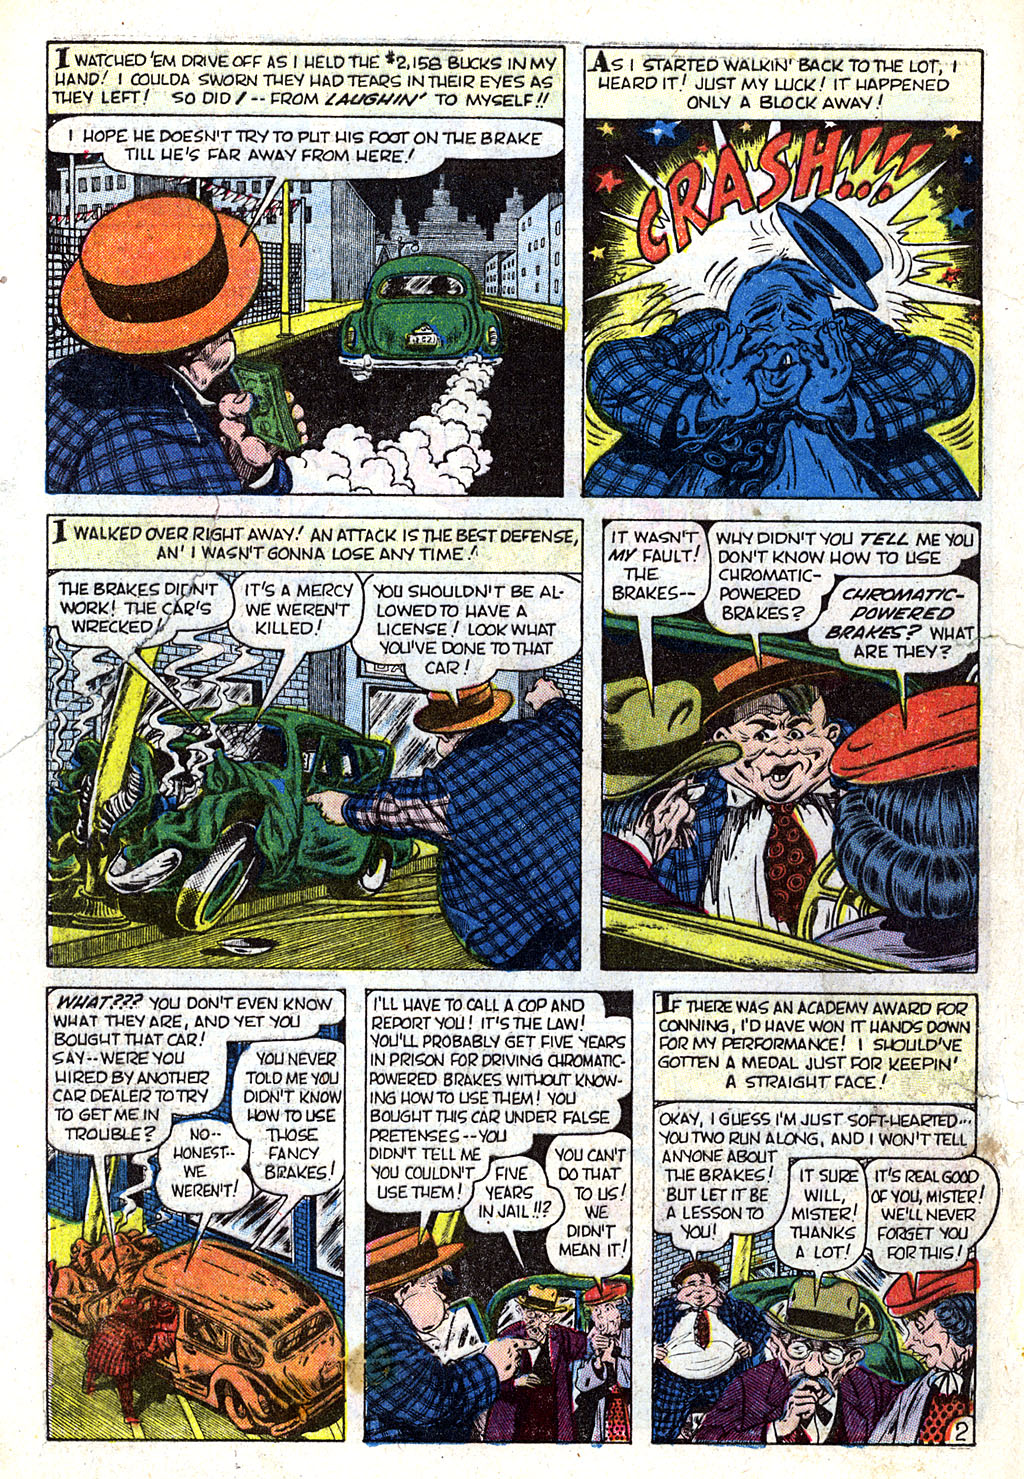 Marvel Tales (1949) 131 Page 3